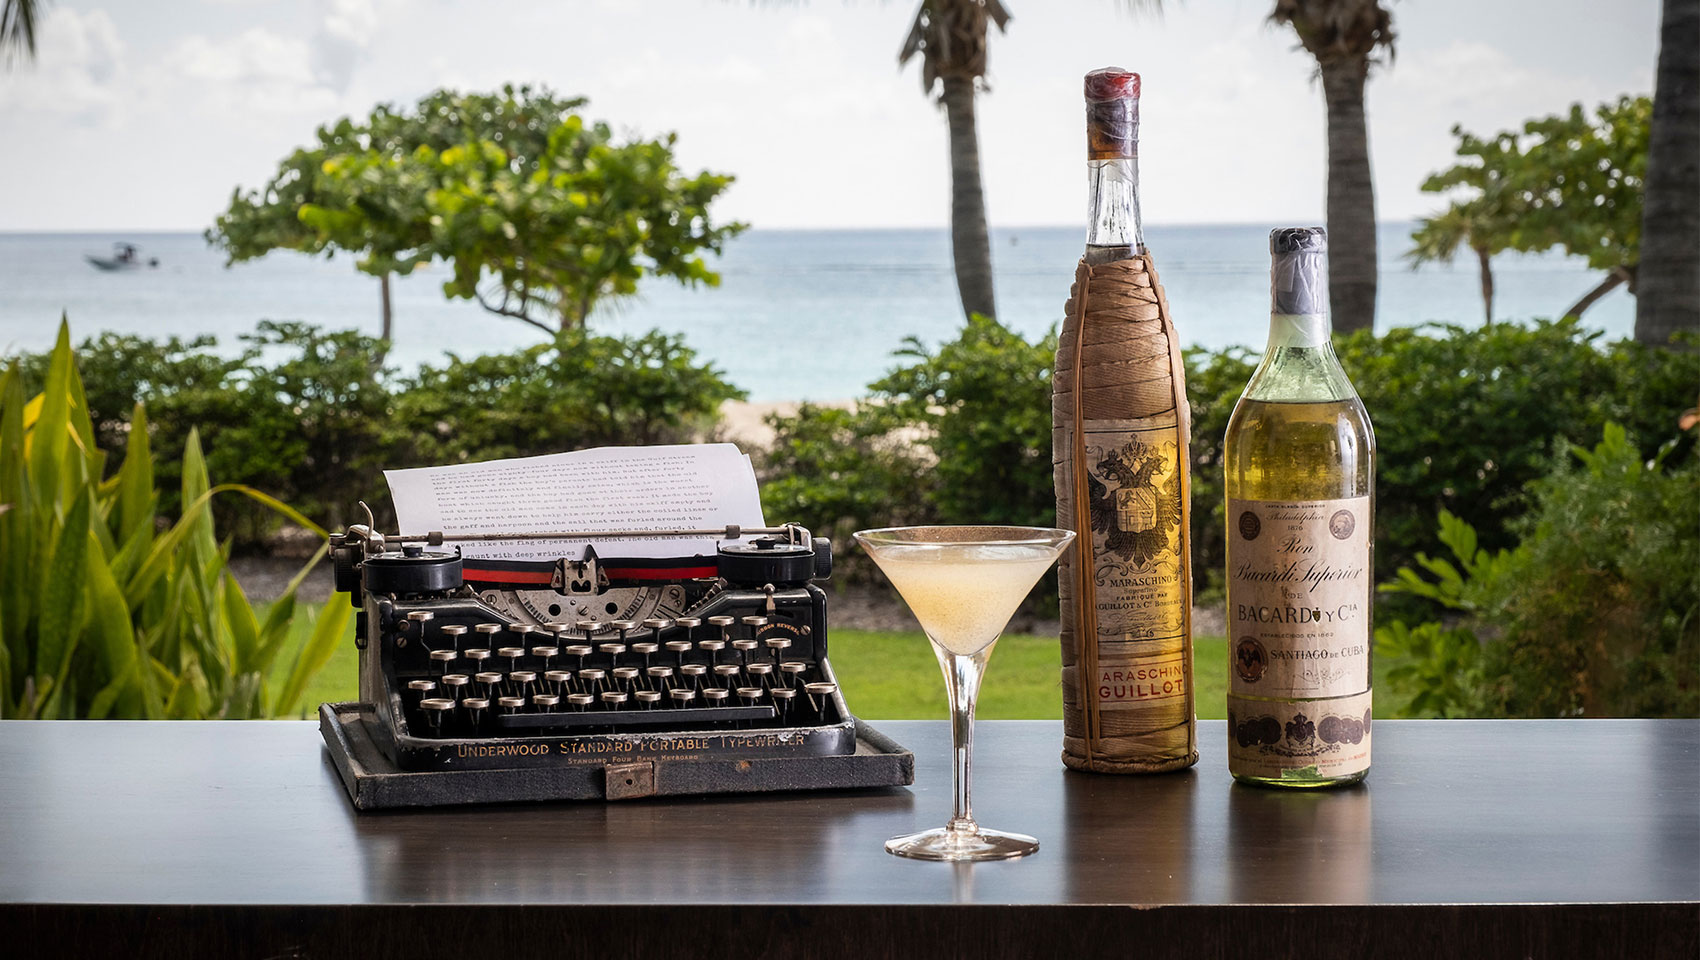 Cocktail + typewriter with ocean view